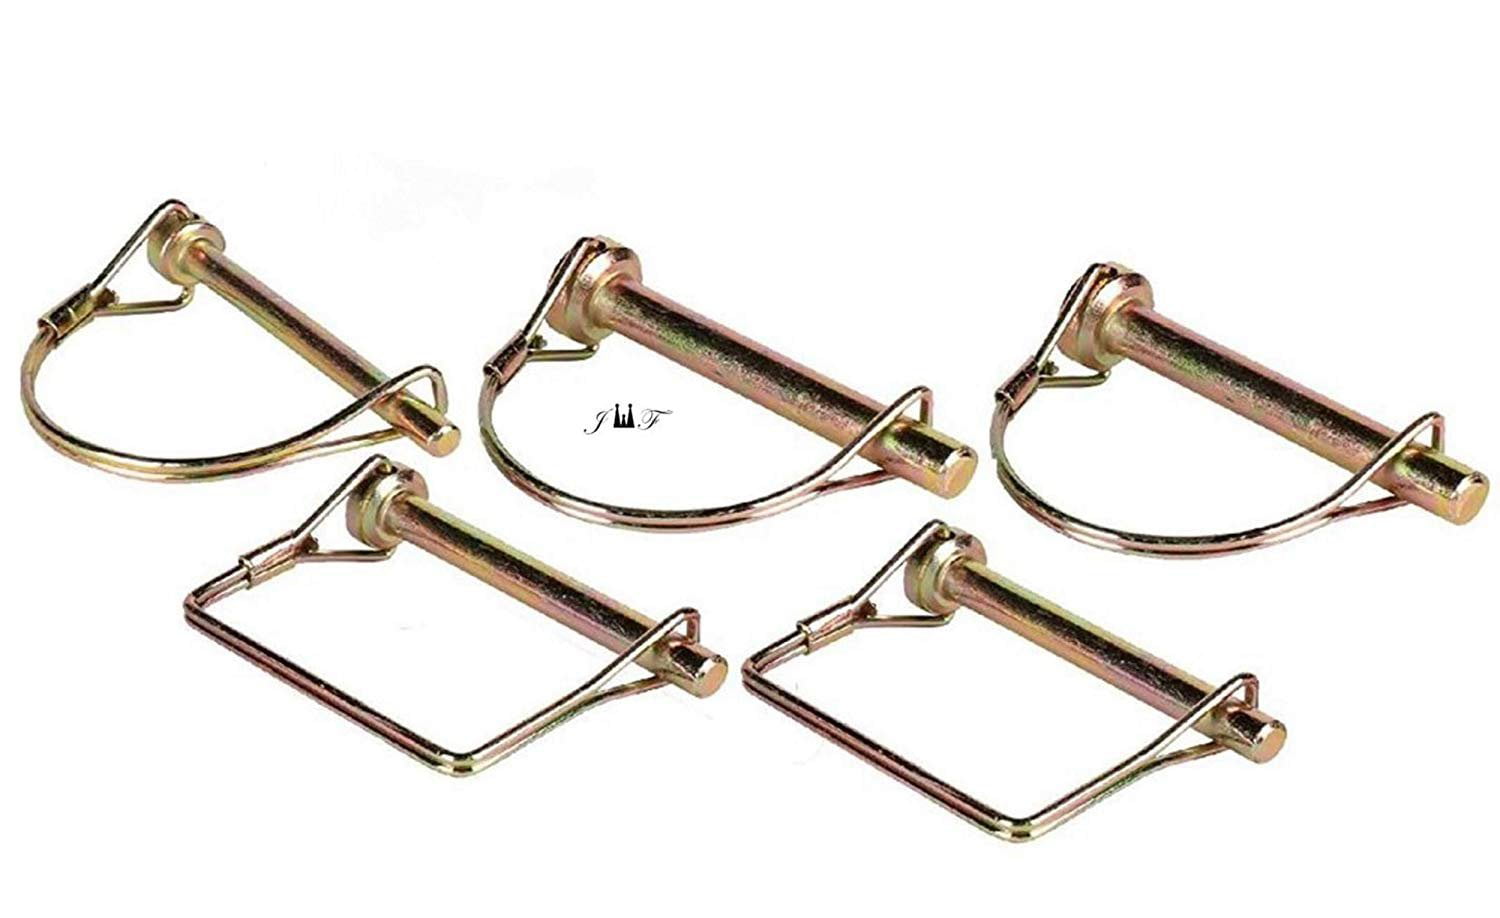 Lawn Garden Trailers Towing Farm Wagons Hitches Couplers 5PC Safety PTO Pin Assortment Set: 3PC Square pins:3x1/4,3x5/16,3x3/8 2PC Round pins:3x1/4,3x5/16- for Automotive